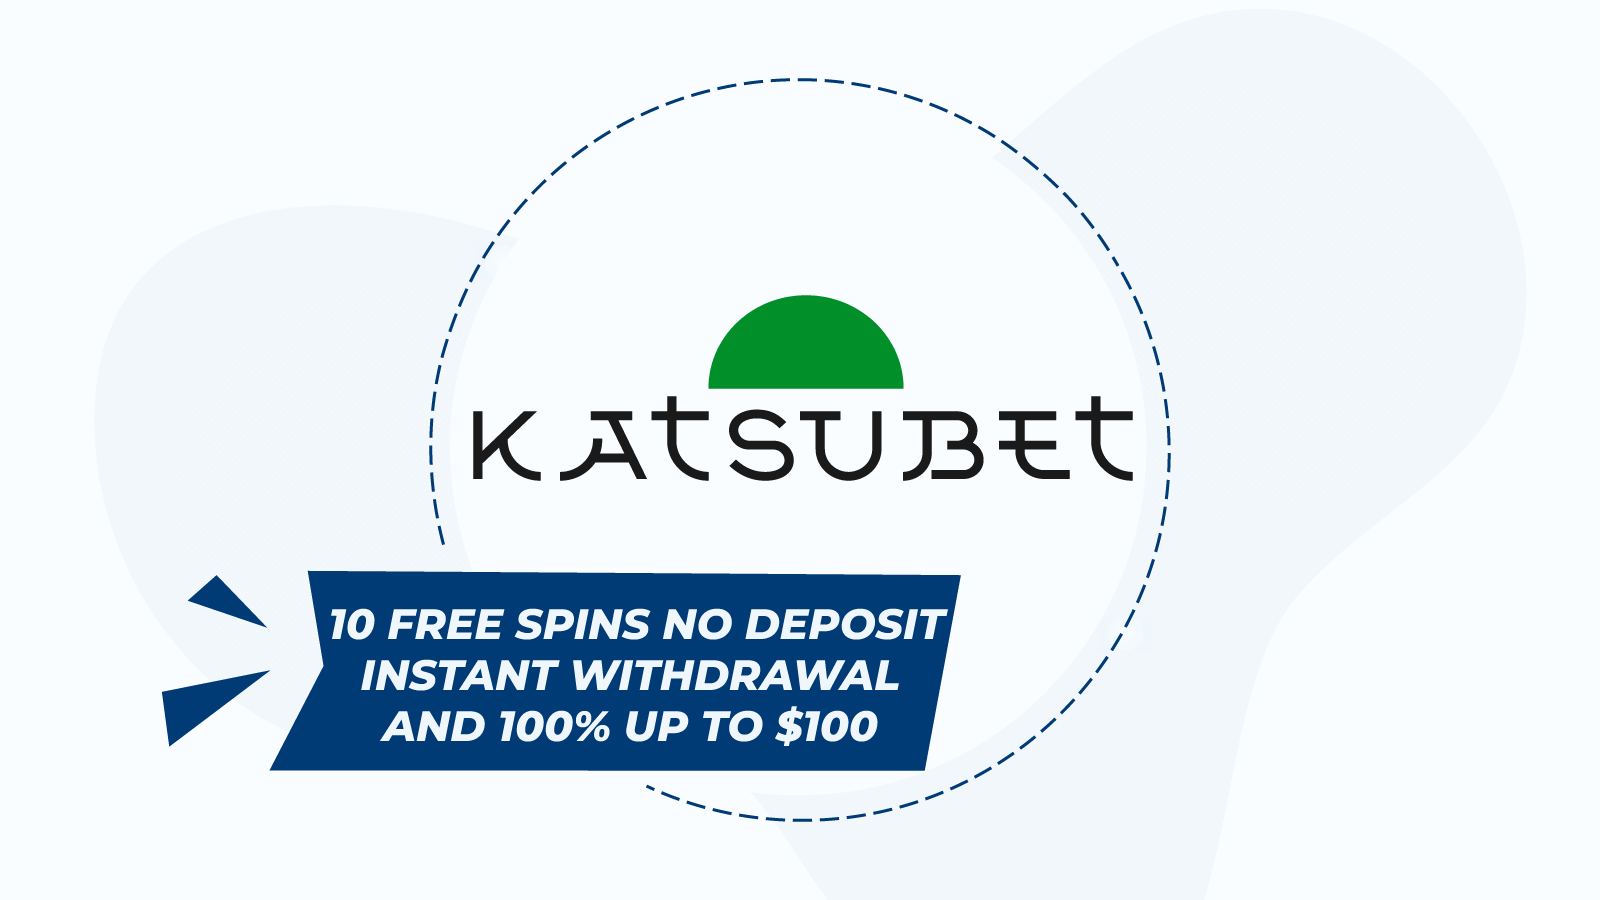 Start with 10 free spins no deposit instant withdrawal and 100% up to R$100 at Katsubet